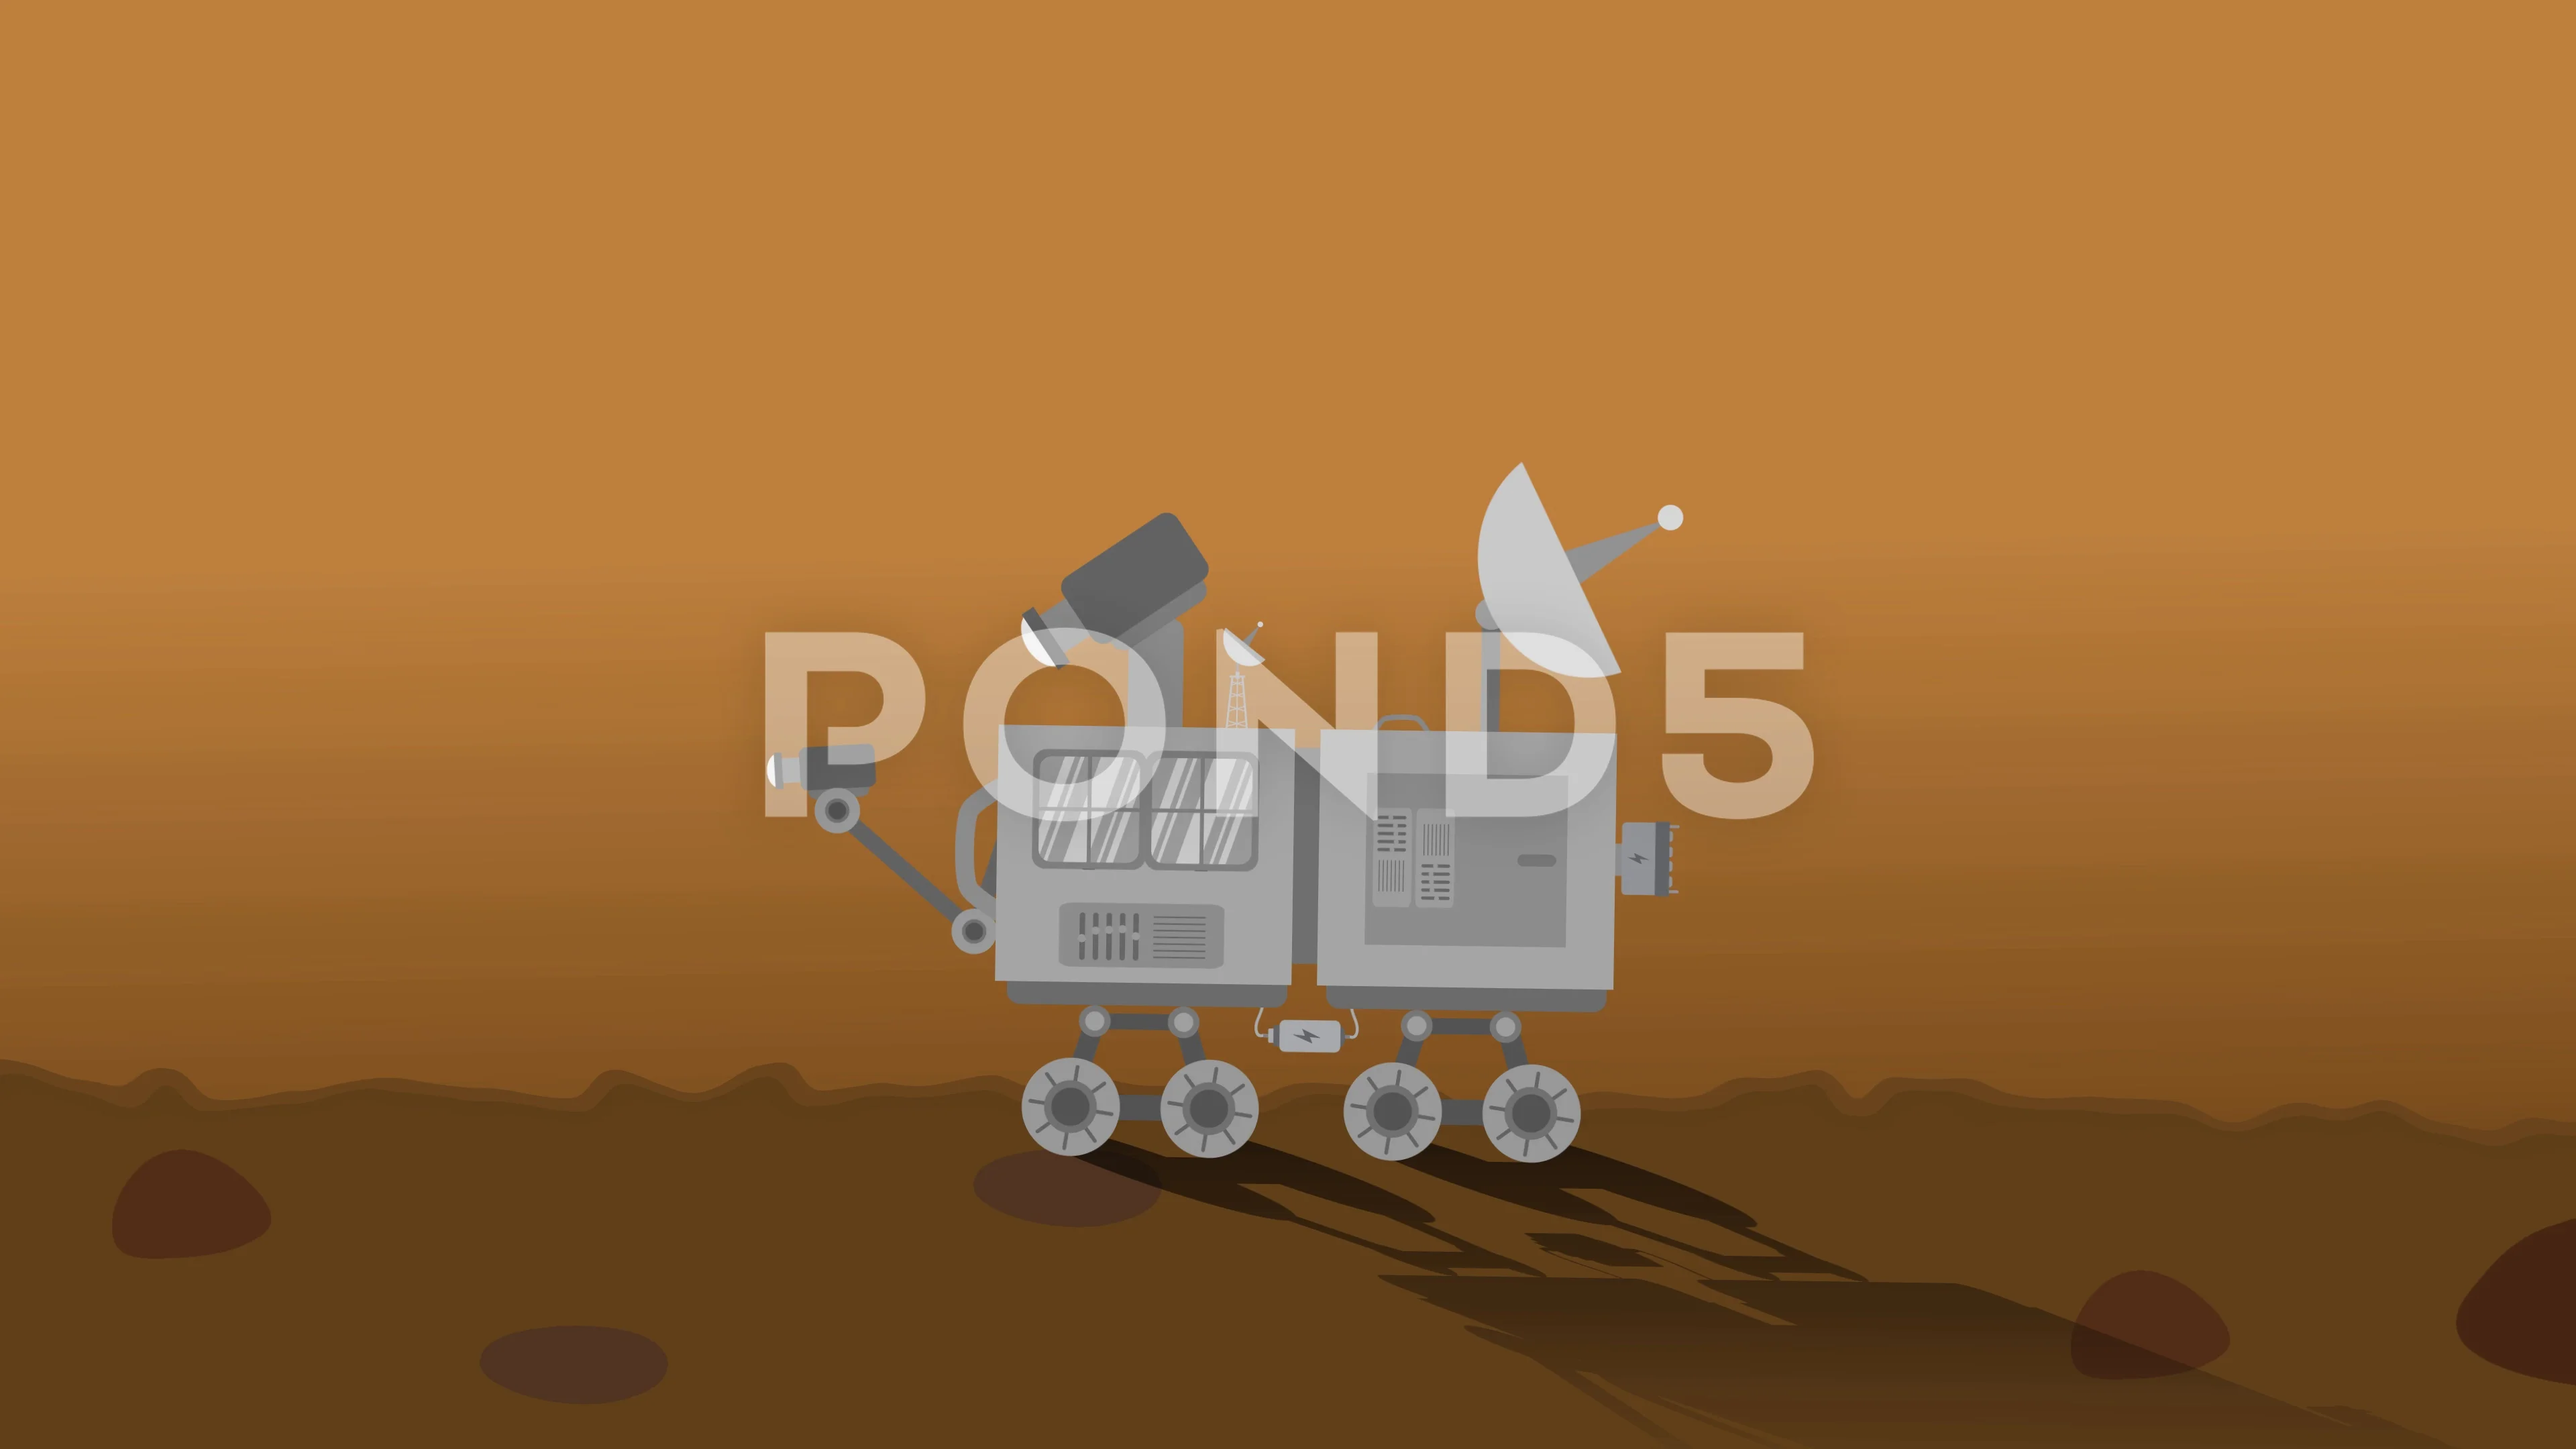 mars rover collecting data